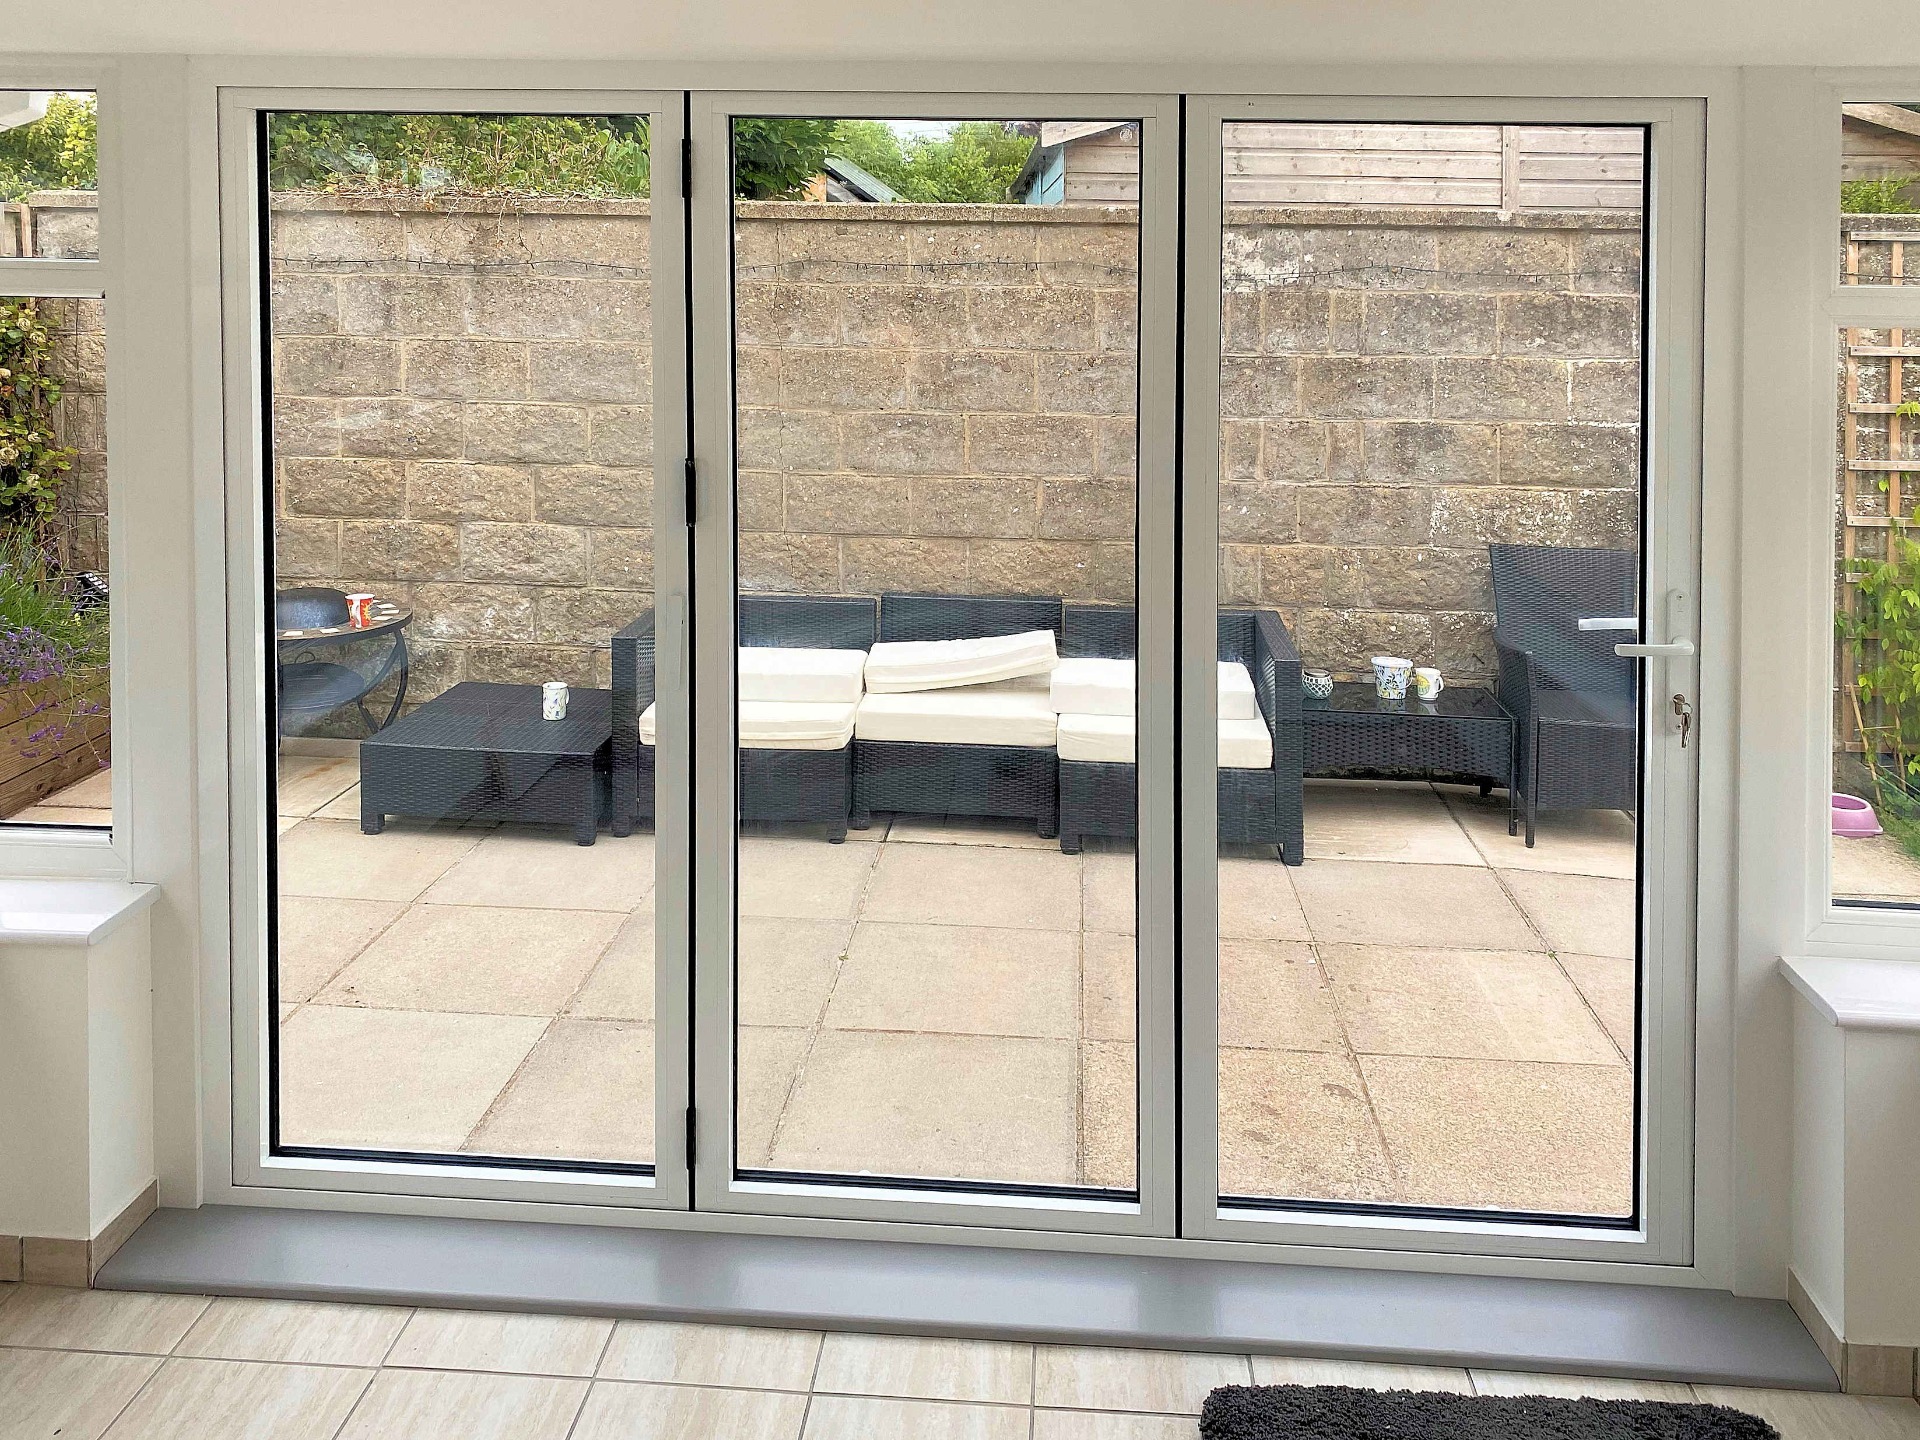 New outlook to patio through completed bifold doors. Conservatory. Barnstaple North Devon